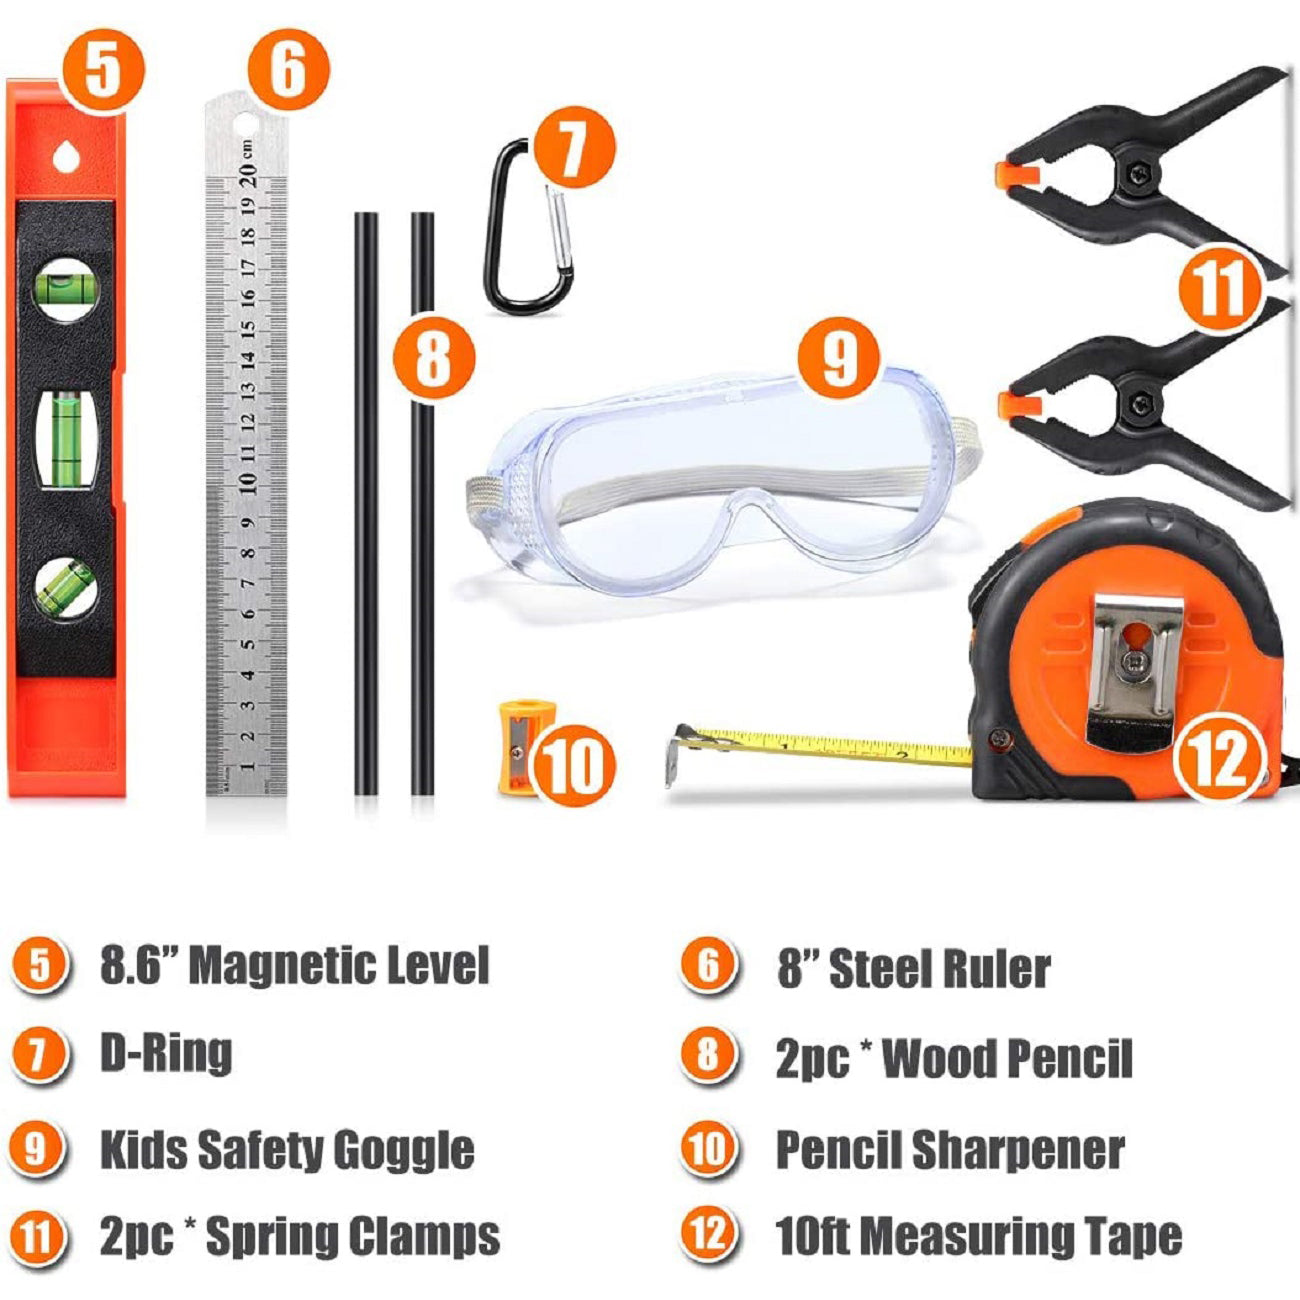  R RECOMFIT 25 Pieces Kids Real Tool kit Children Real Tool Set  with Real Hand Tools, Kids Tool Belt, Pouch Bag,Magnetic Wristband for  Small Hands DIY Woodworking Projects Home Repair 